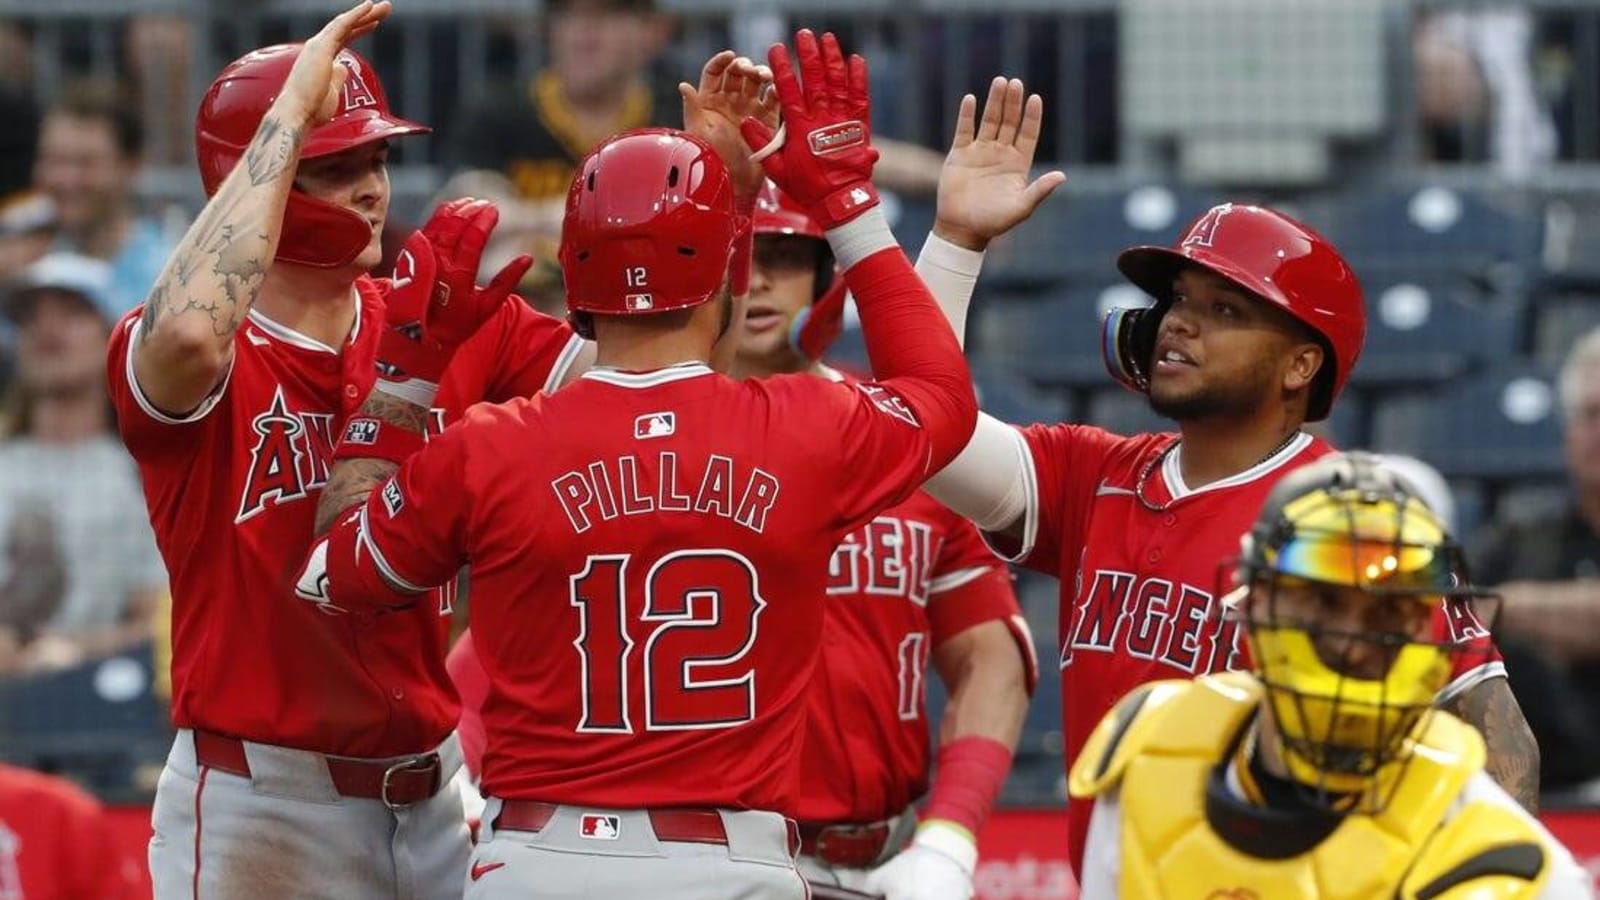 Kevin Pillar homers twice, drives in 6 as Angels crush Pirates